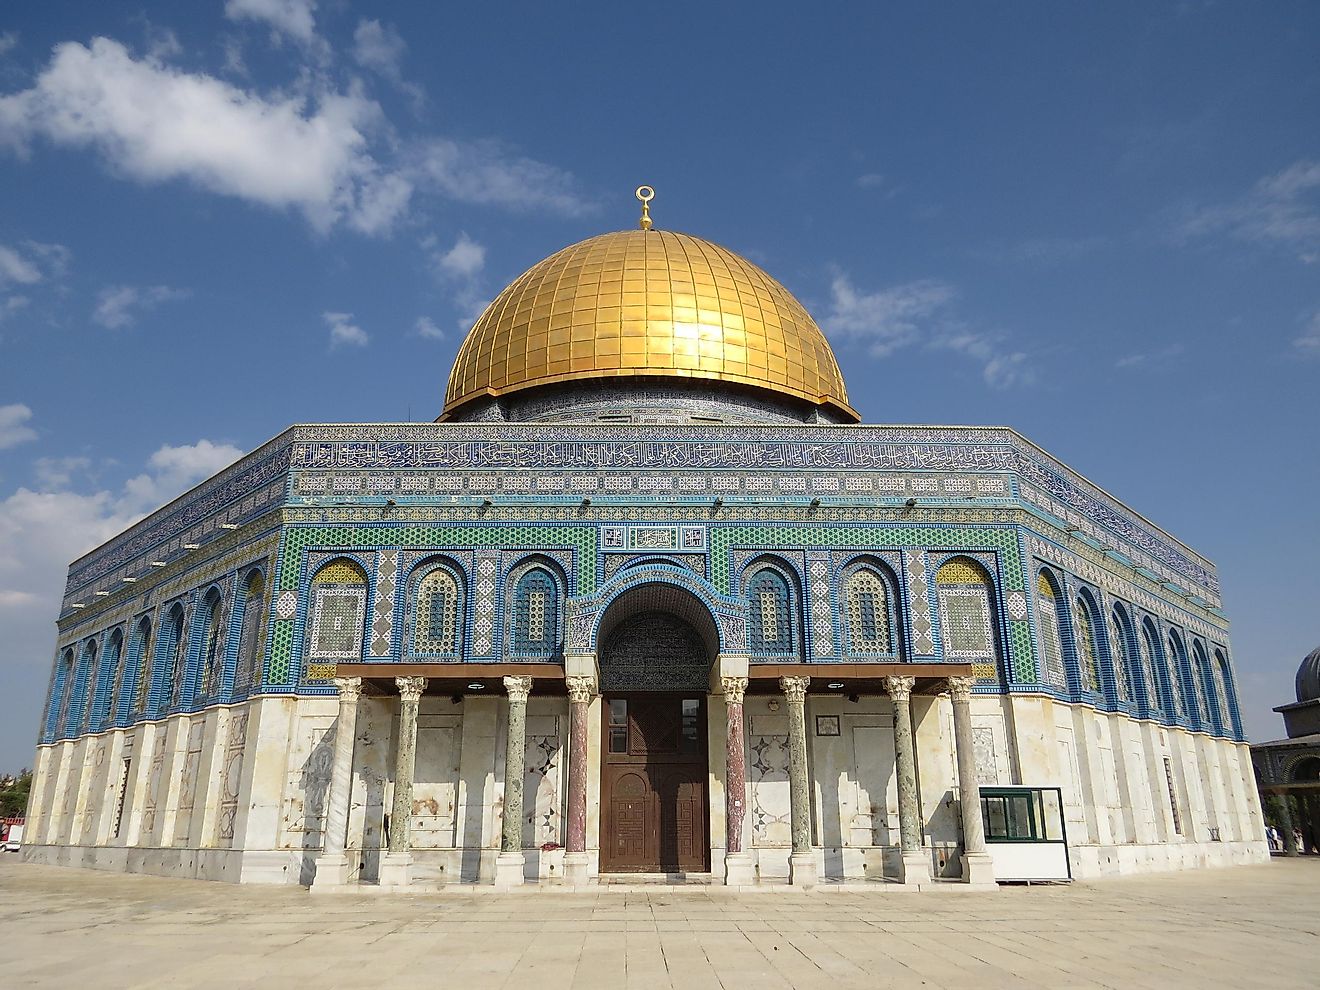 This Islamic architectural masterpiece is located on Temple Mount in Jerusalem.